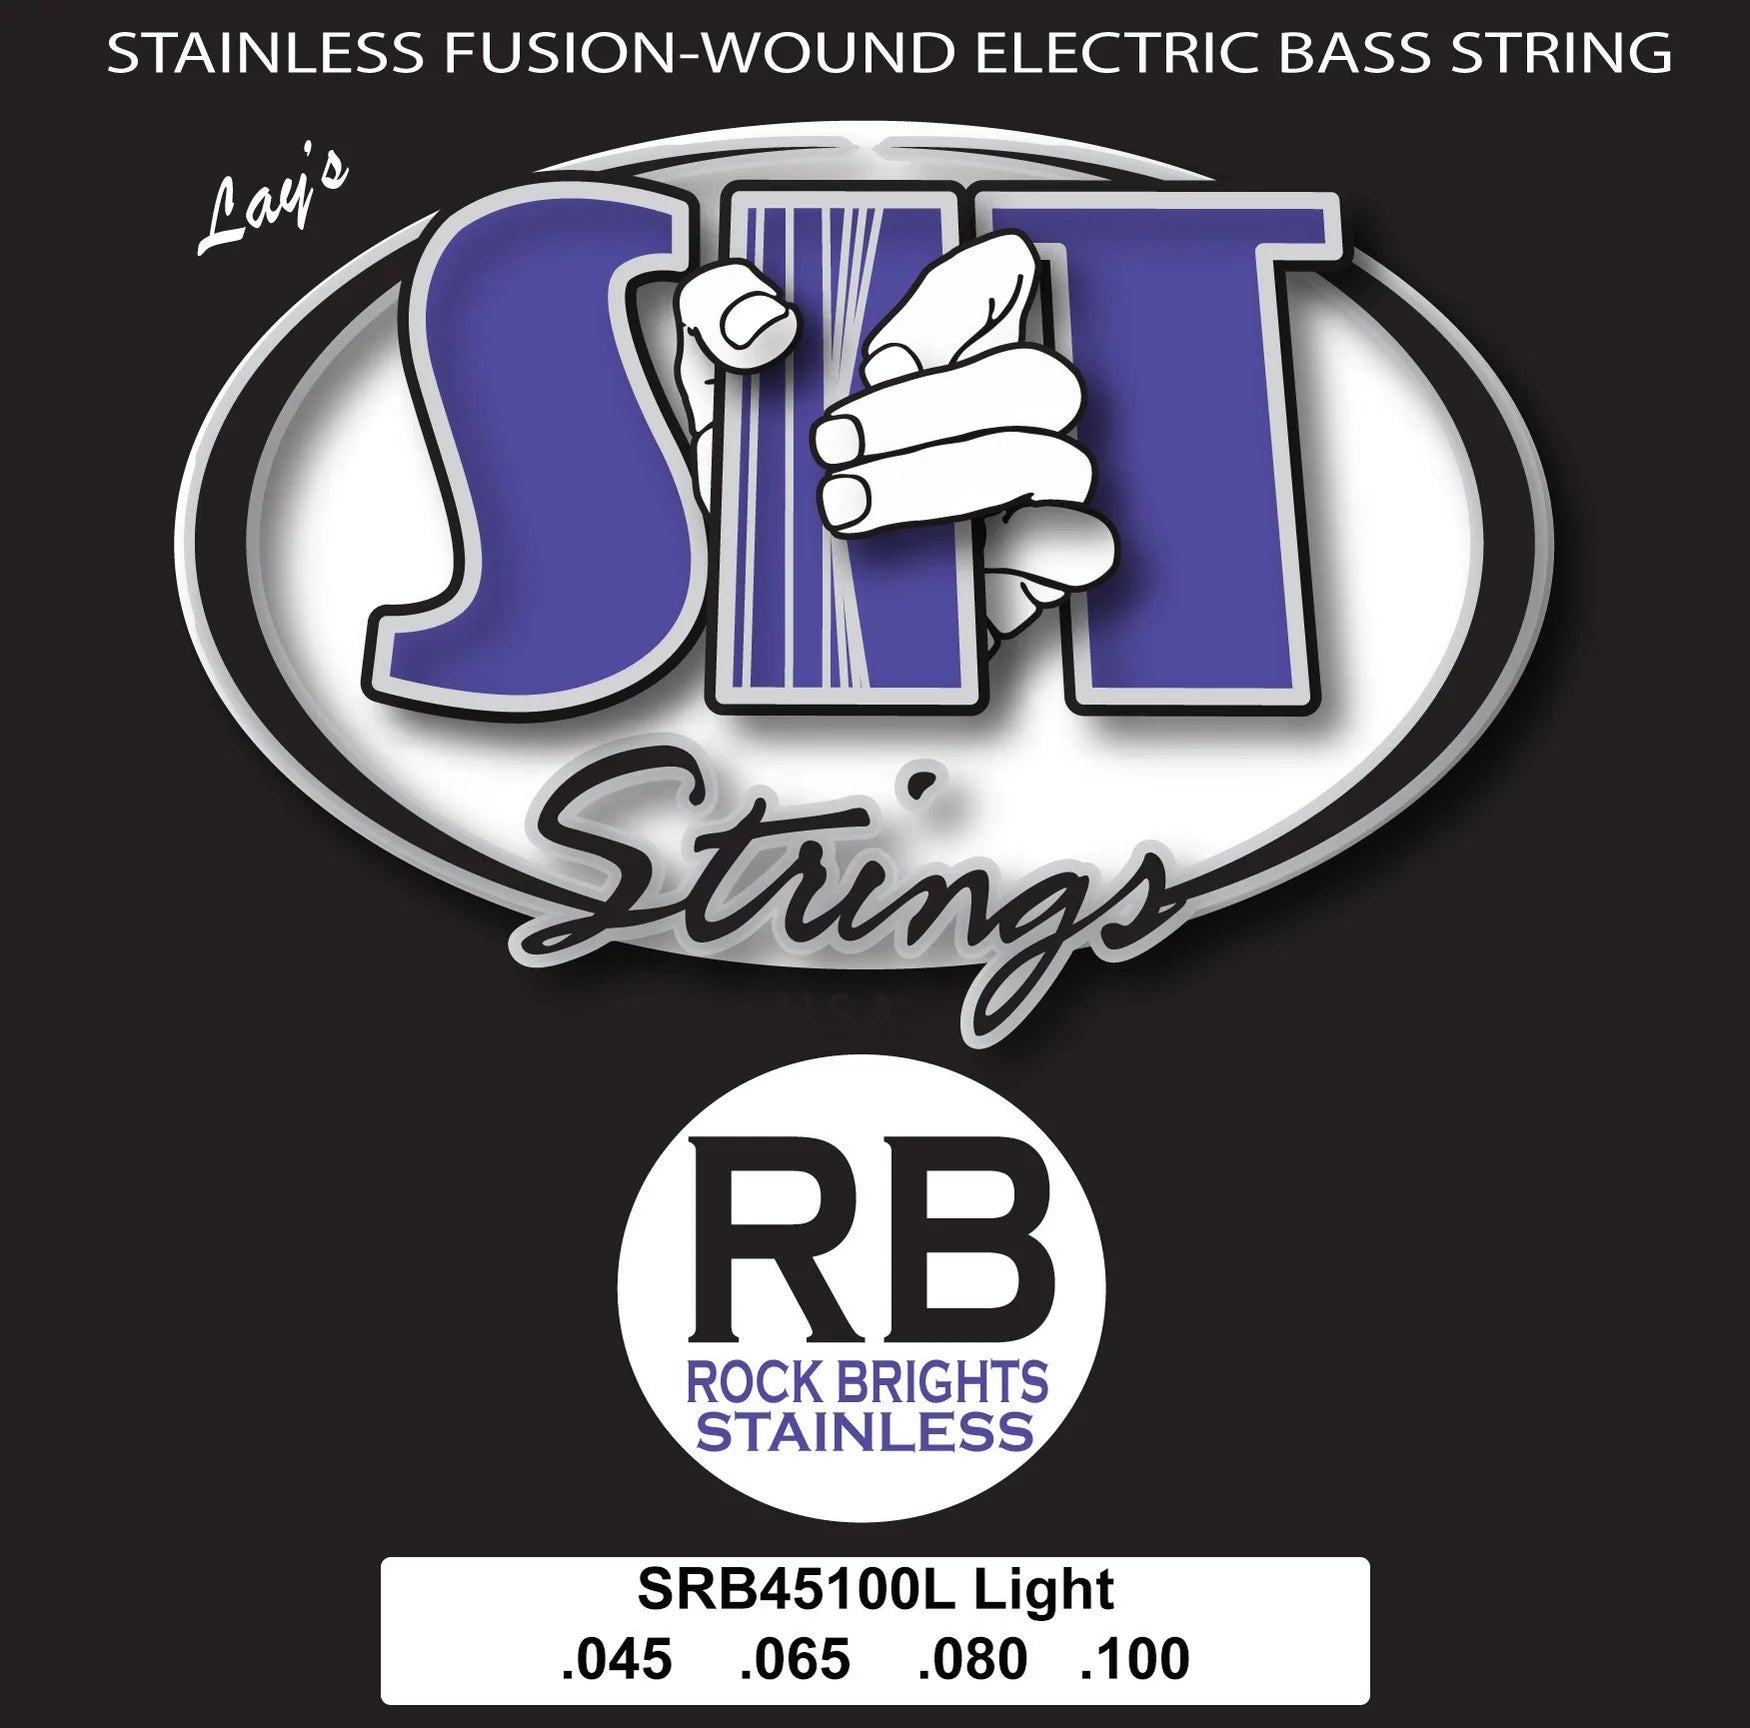 SIT ROCK BRIGHT STAINLESS STEEL BASS - HIENDGUITAR SRB45100L LIGHT SRB45100L LIGHT SIT Bass Strings